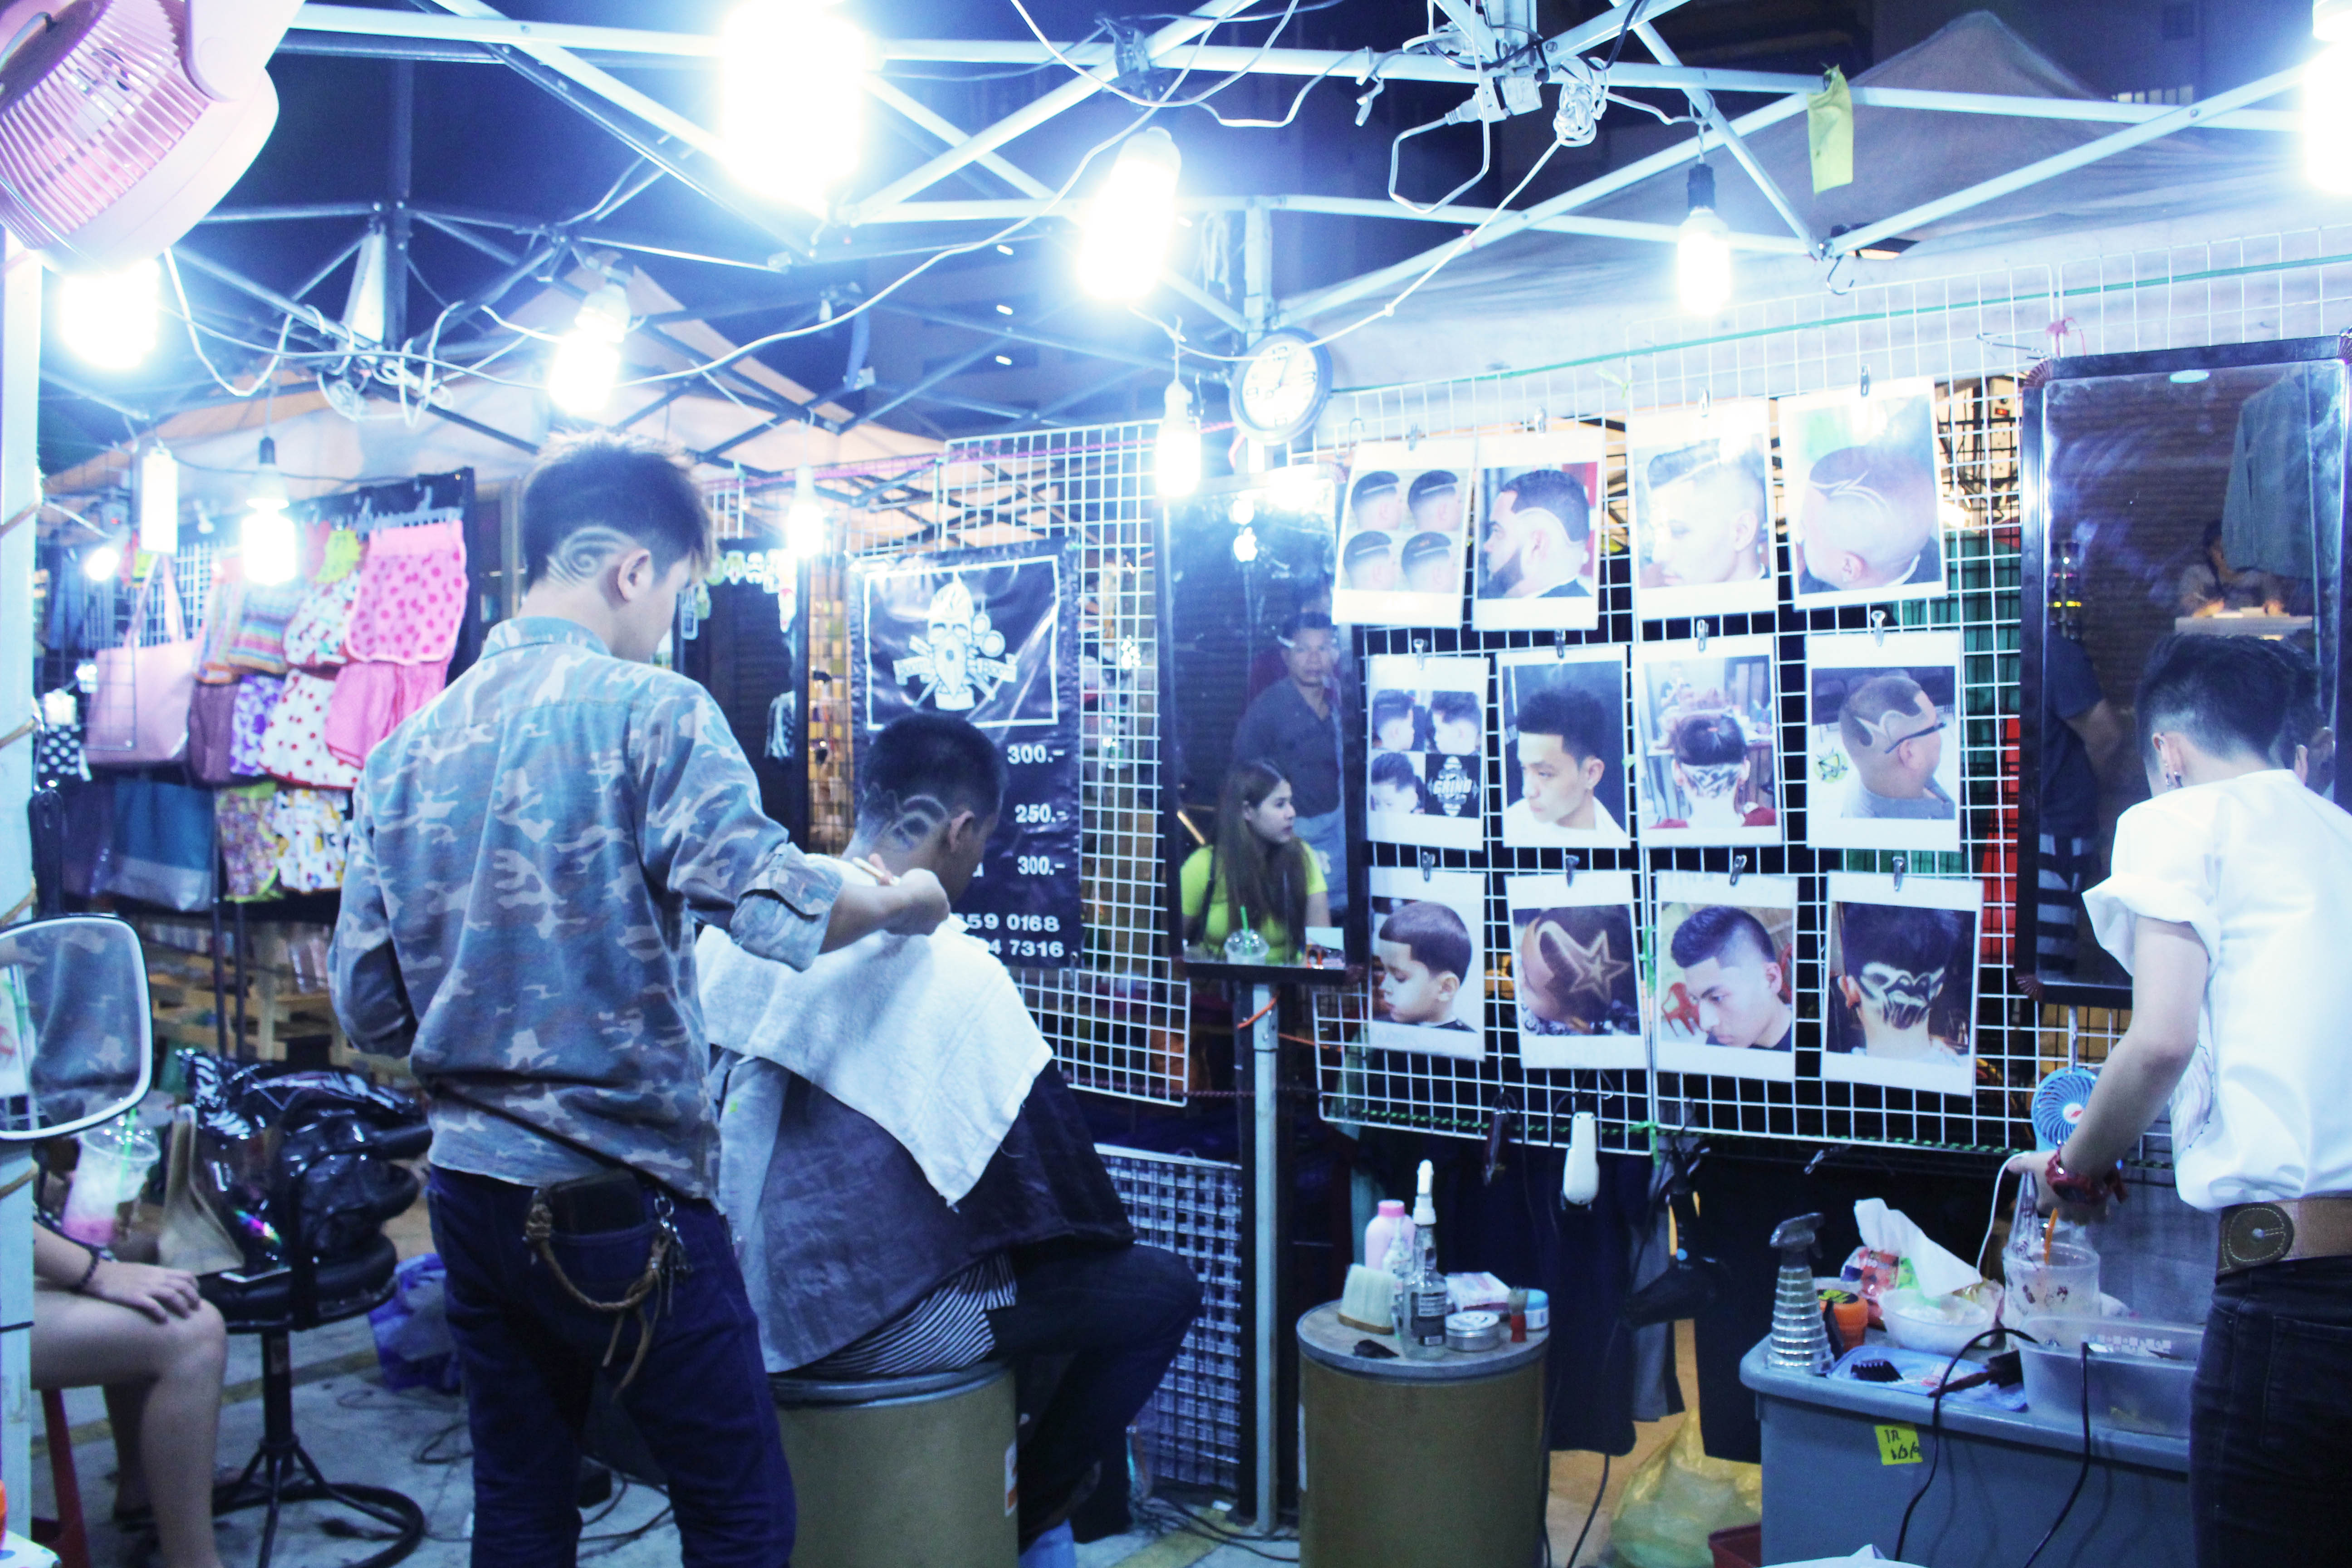 Little did we expect a barbershop right smack in the middle of Rot Fai NIght Market.